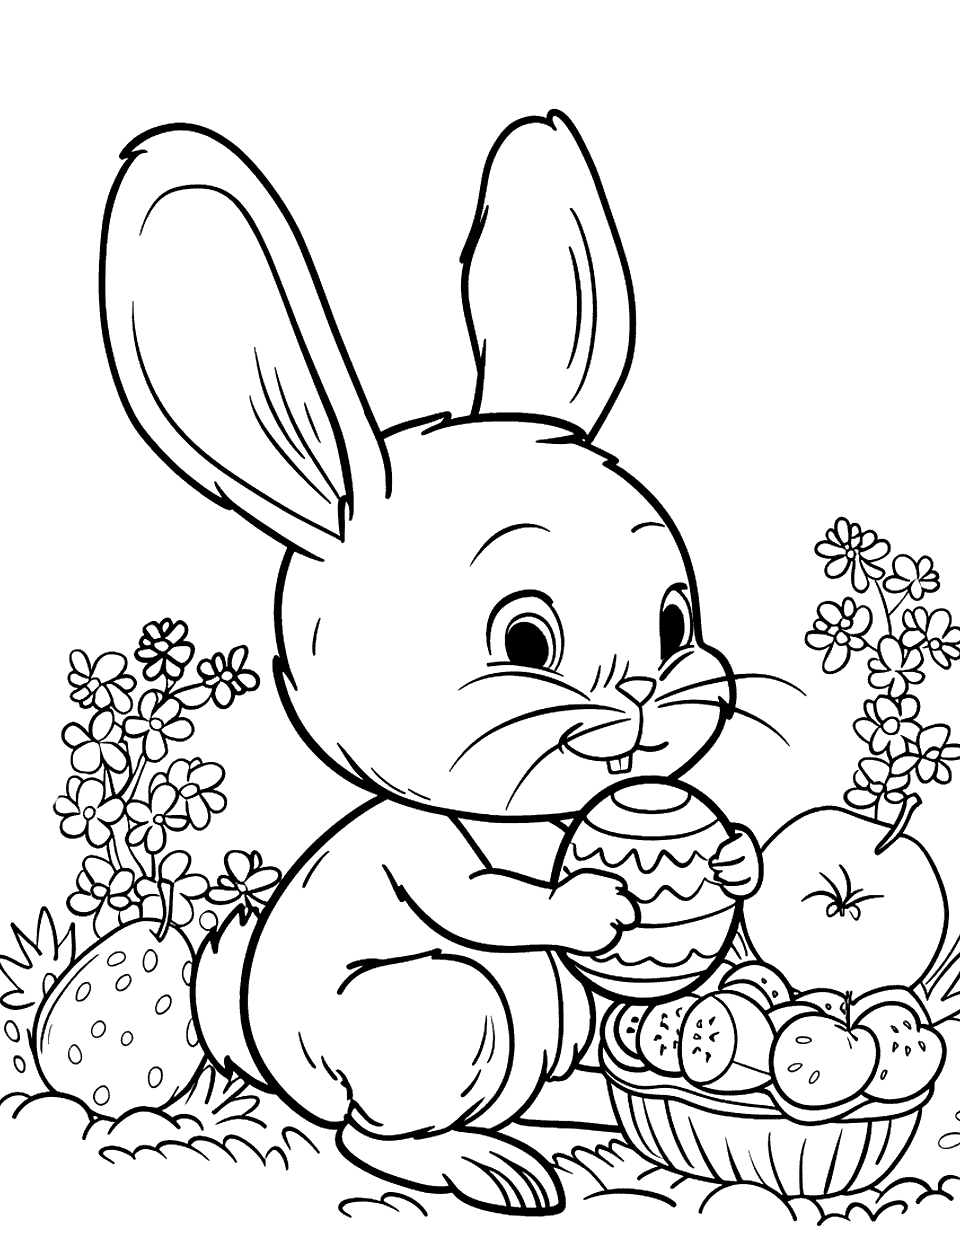 Bunny's Fruit Feast Easter Bunny Coloring Page - A bunny sitting in a garden, surrounded by fruits and holding an Easter in the hand looking for the perfect place to put it.